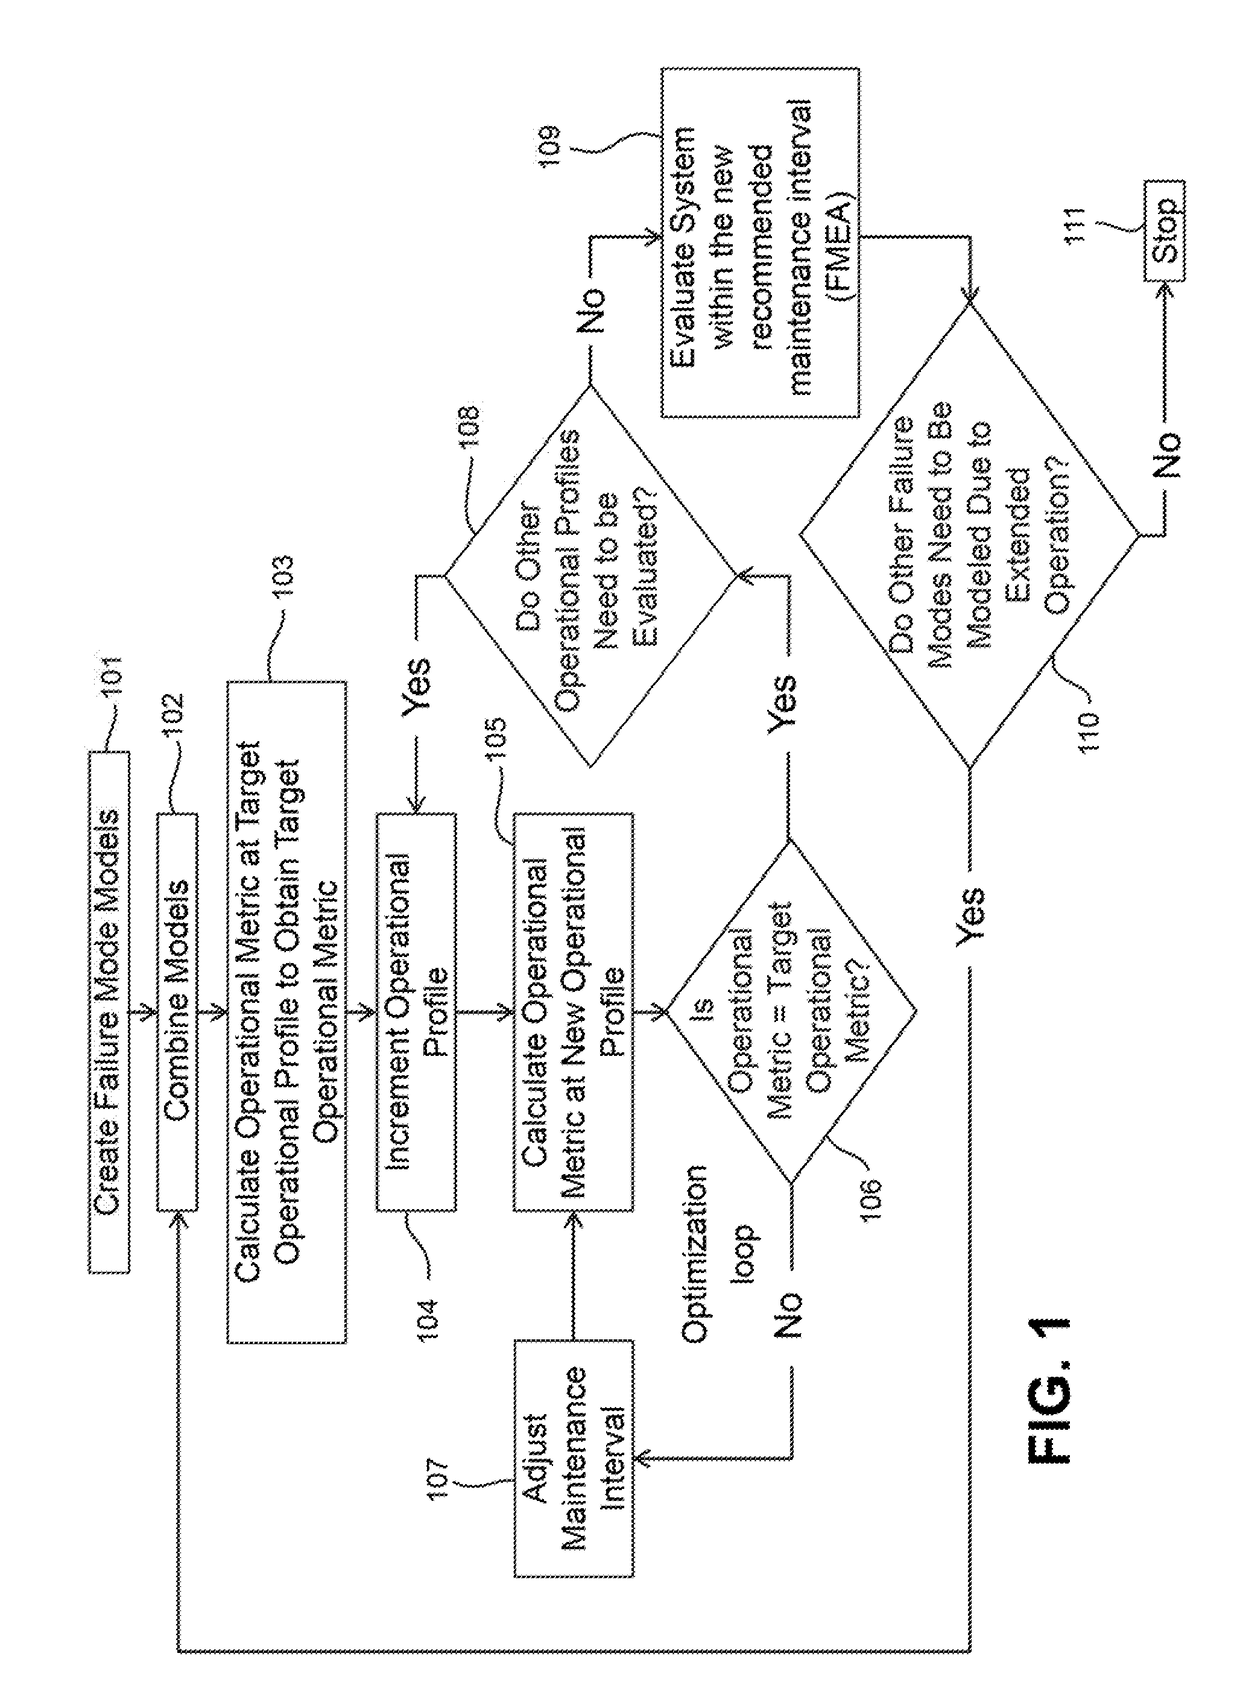 System and method for optimization of recommended service intervals